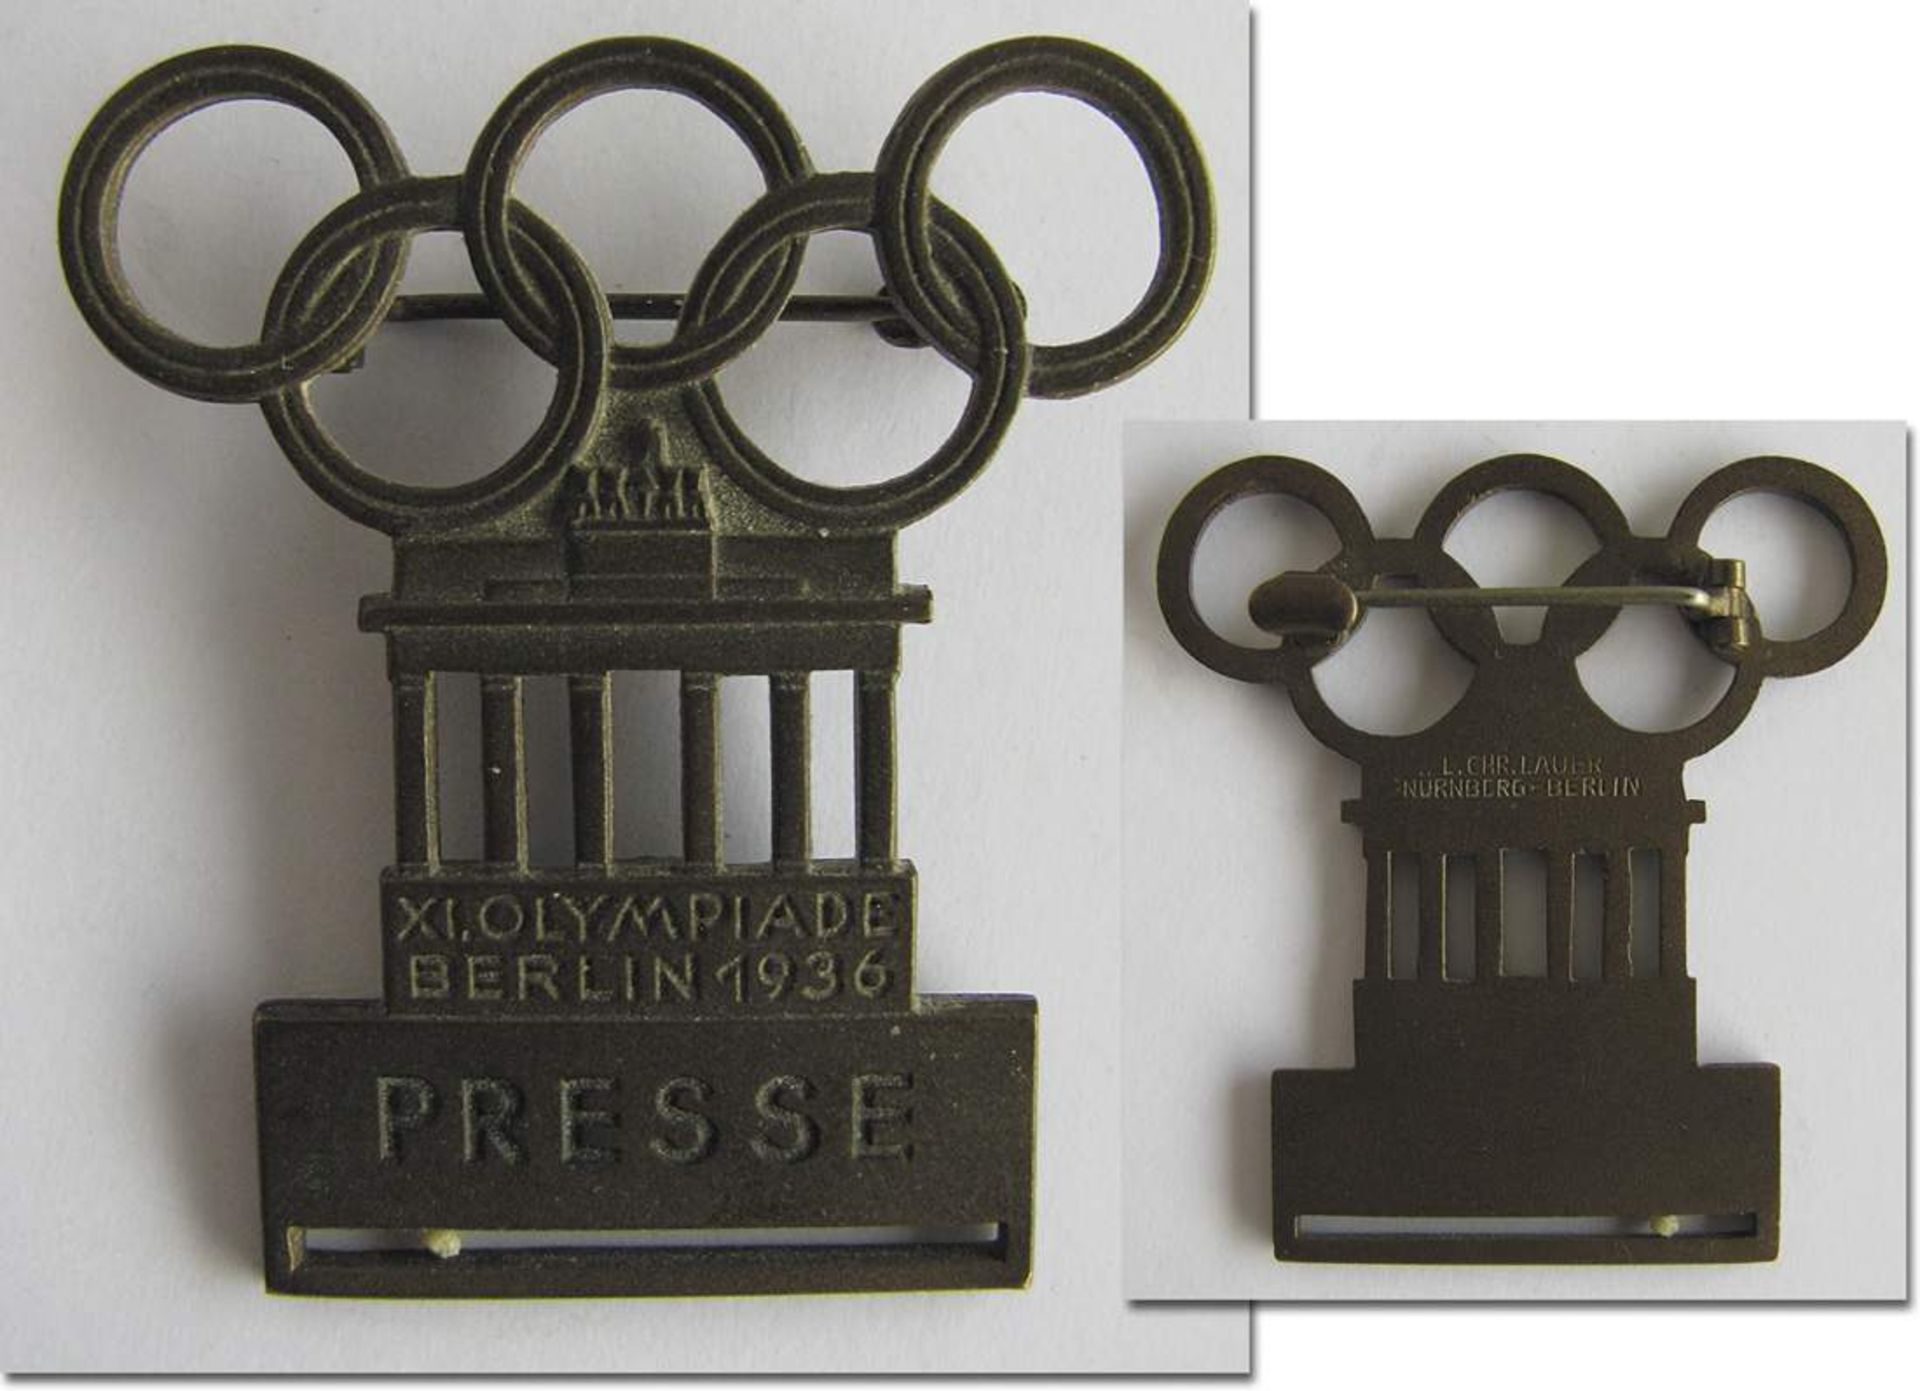 Olympic Games 1936. Participation badge Press - with inscribtion PRESSE. Bronze, without ribbon.